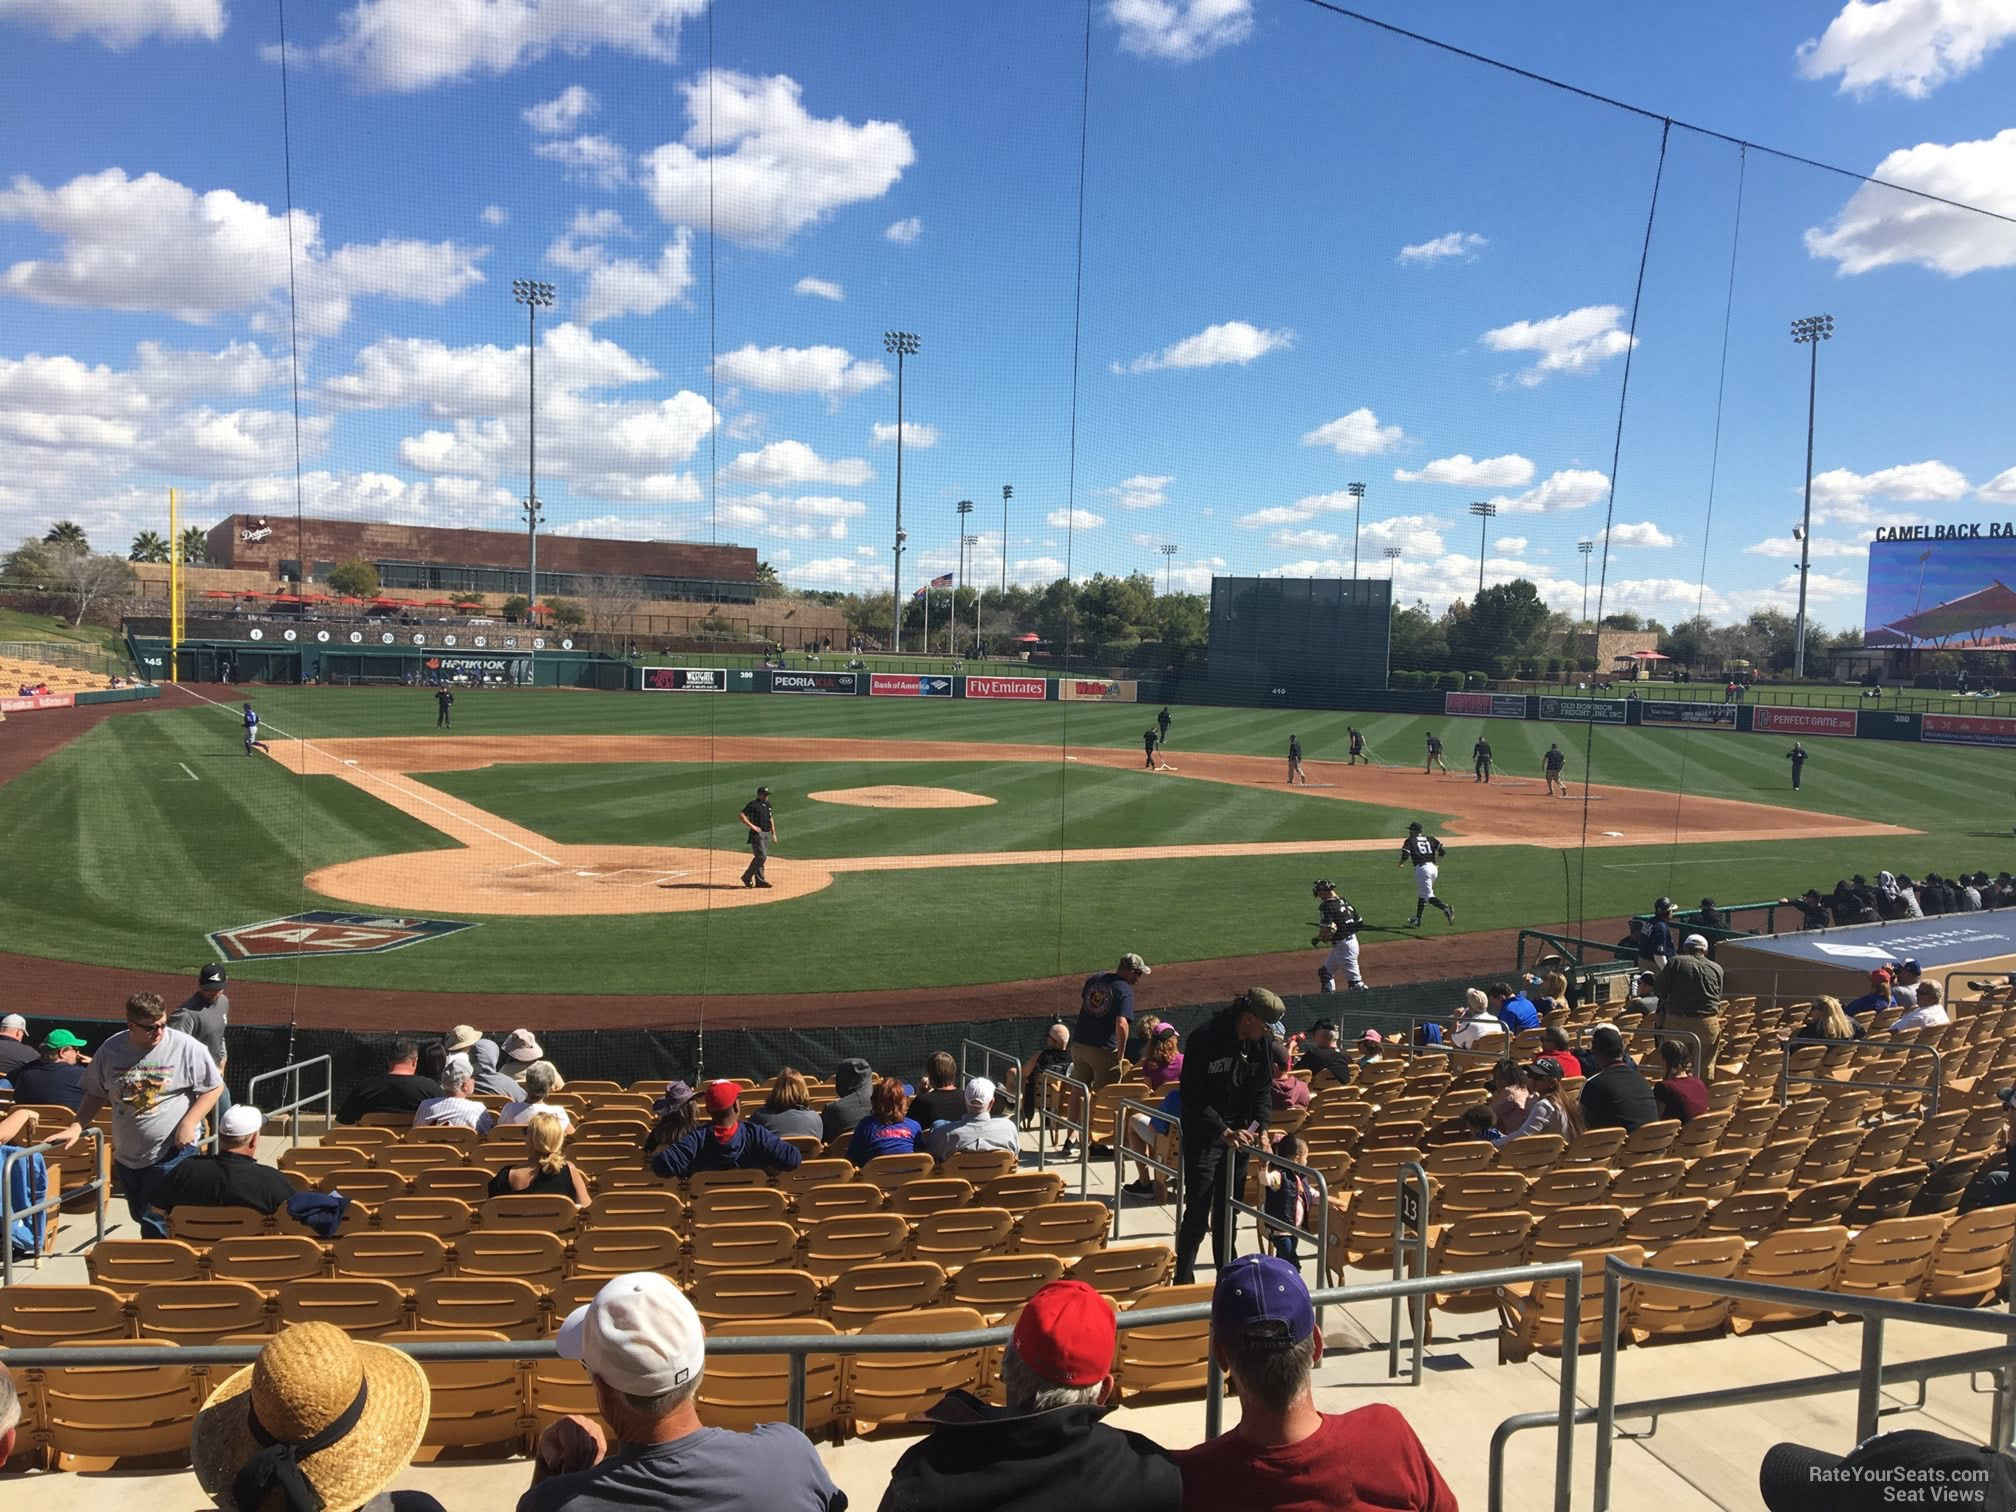 section 113, row 5 seat view  - camelback ranch